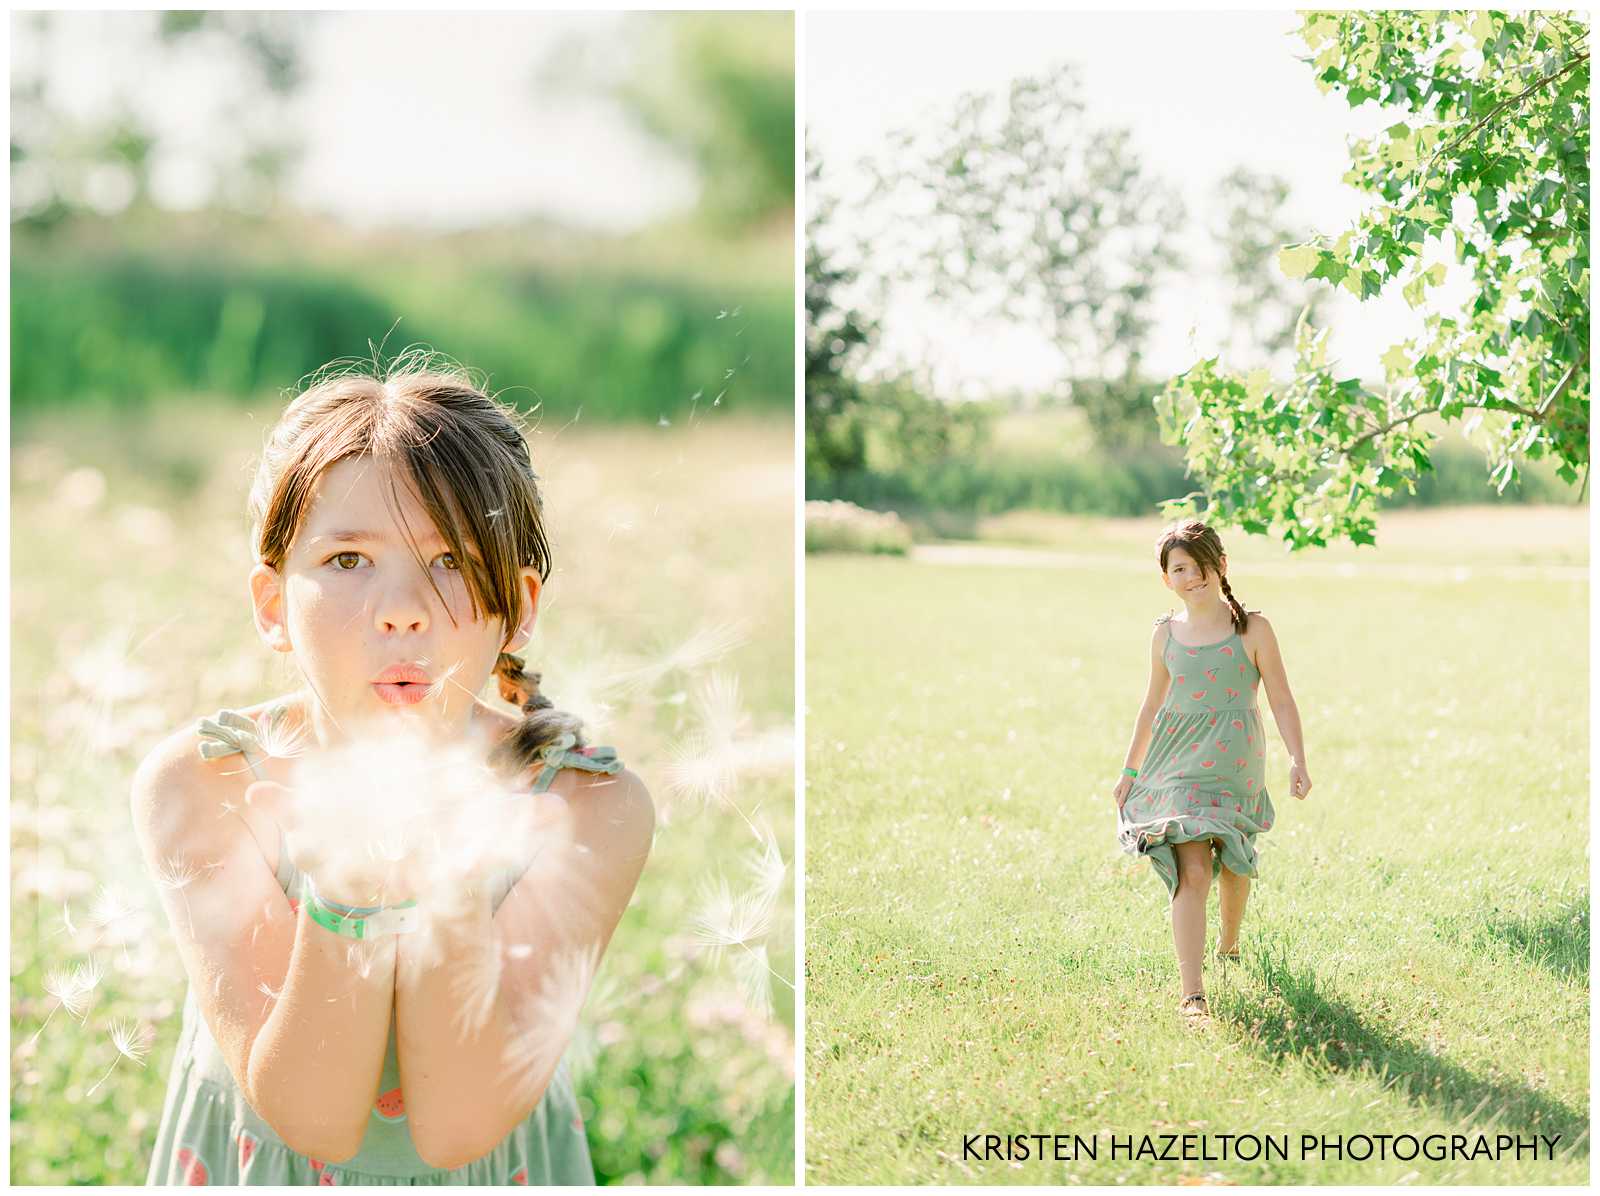 Young girl blowing dandelion seeds in a meadow by Naperville Family Photographer Kristen Hazelton.